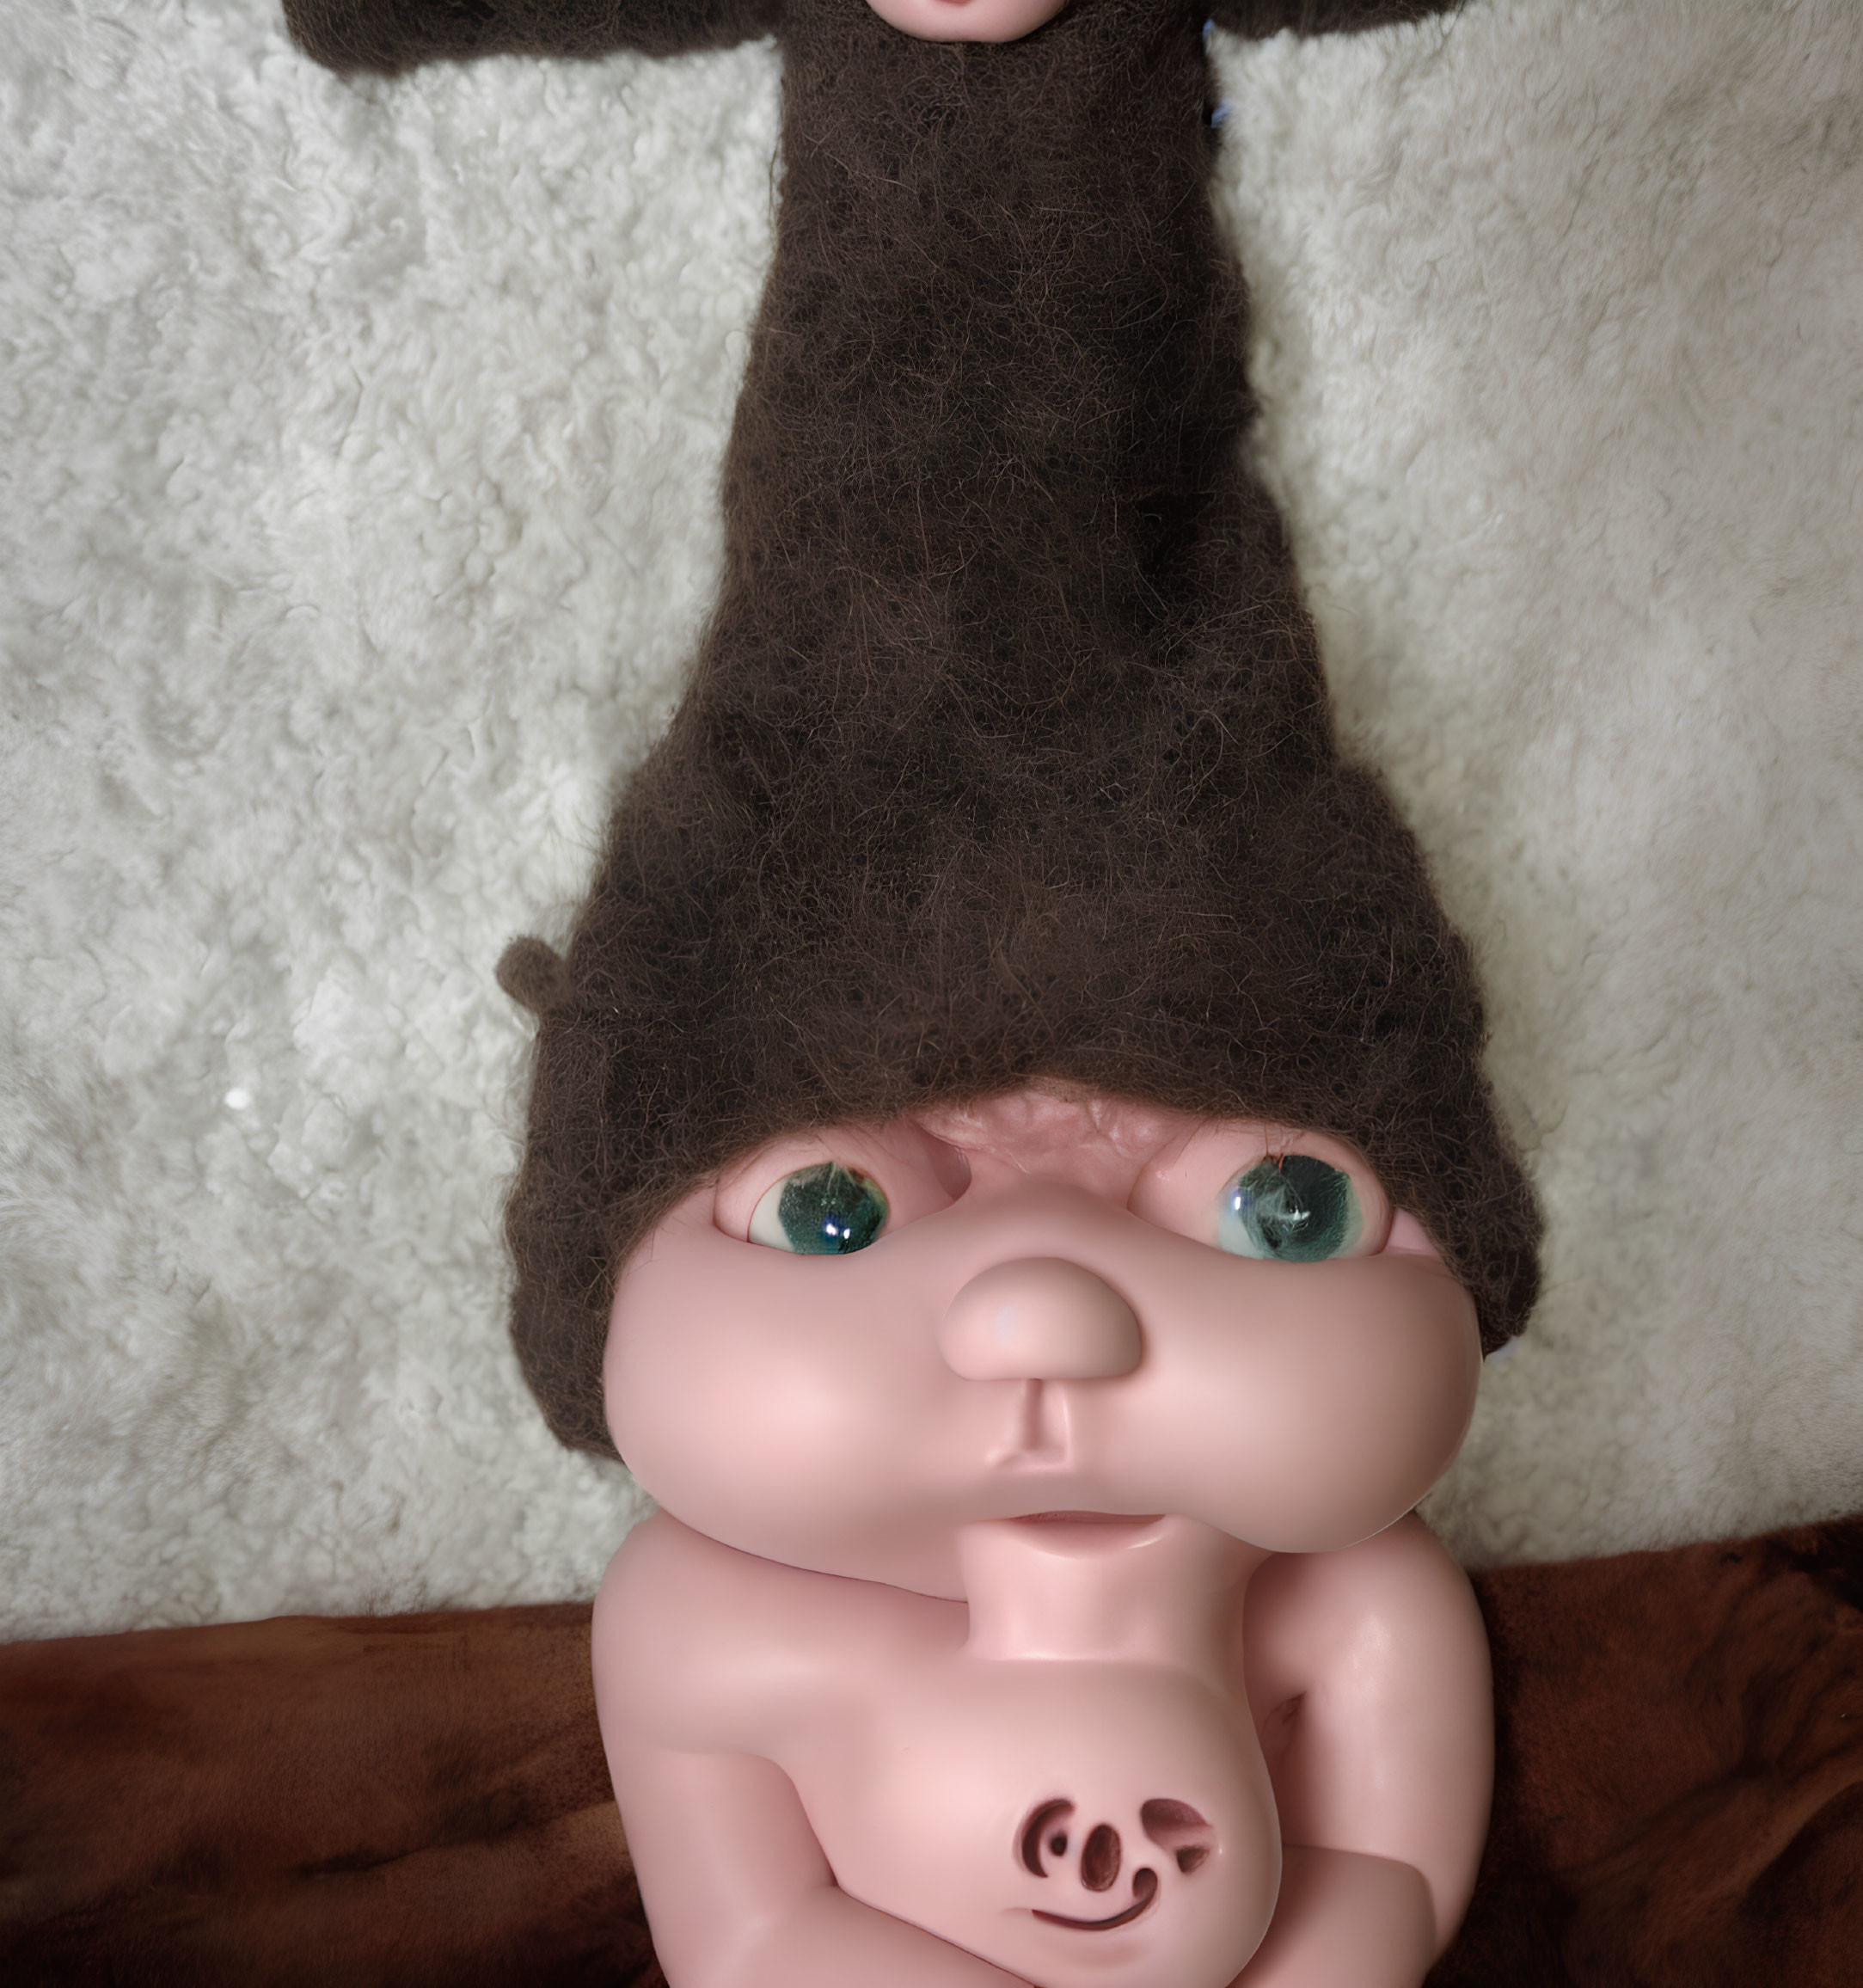 Exaggerated features doll with pointy hairdo and green eyes on white and brown background